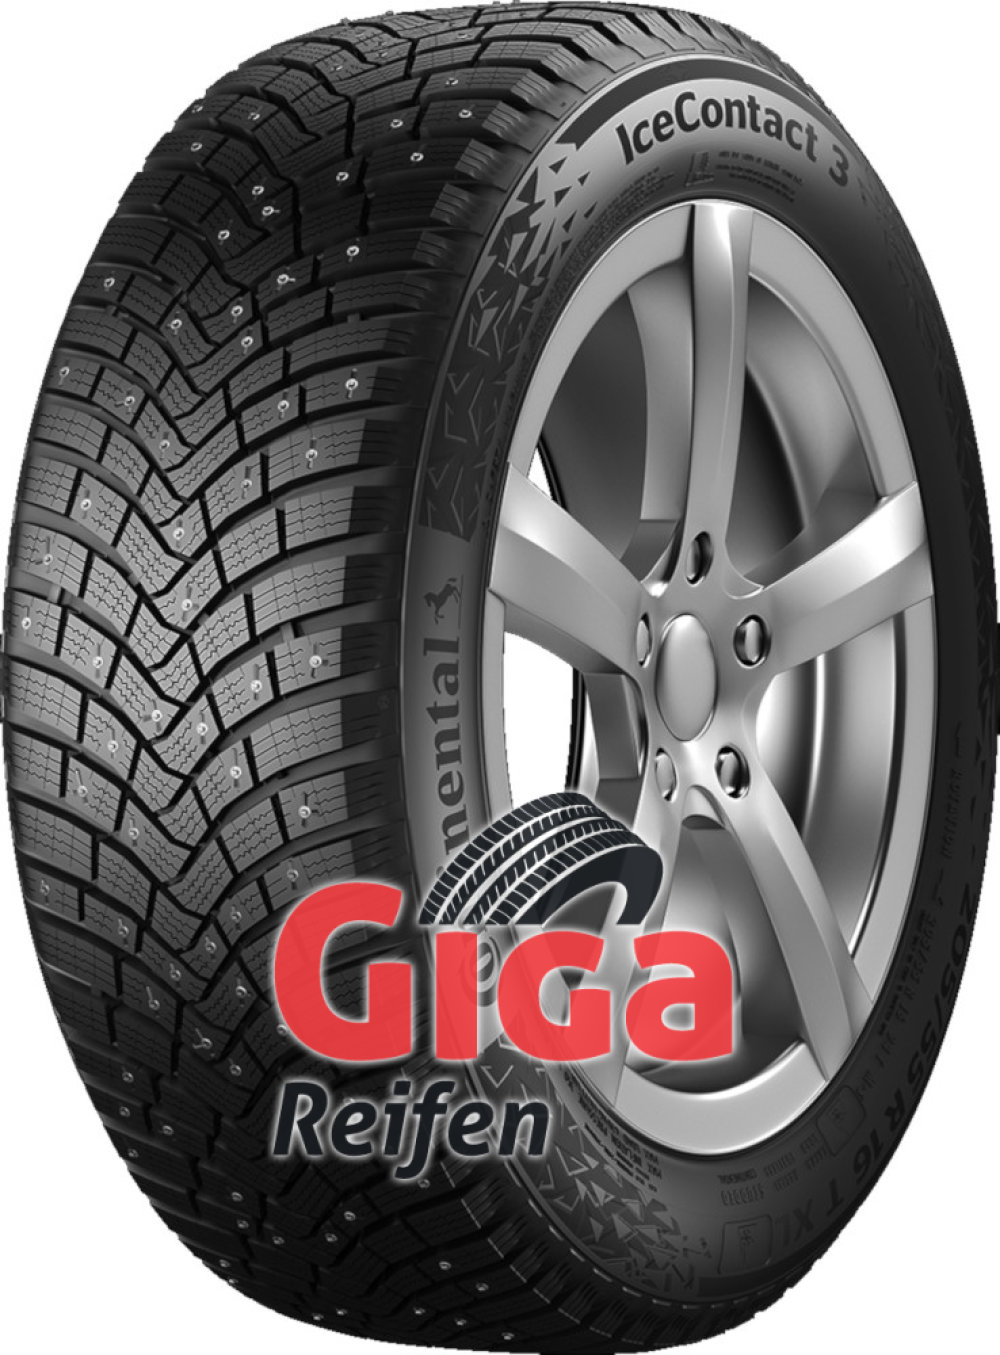 Continental IceContact 3 ( 235/50 R20 104T XL, bespiked ) von Continental